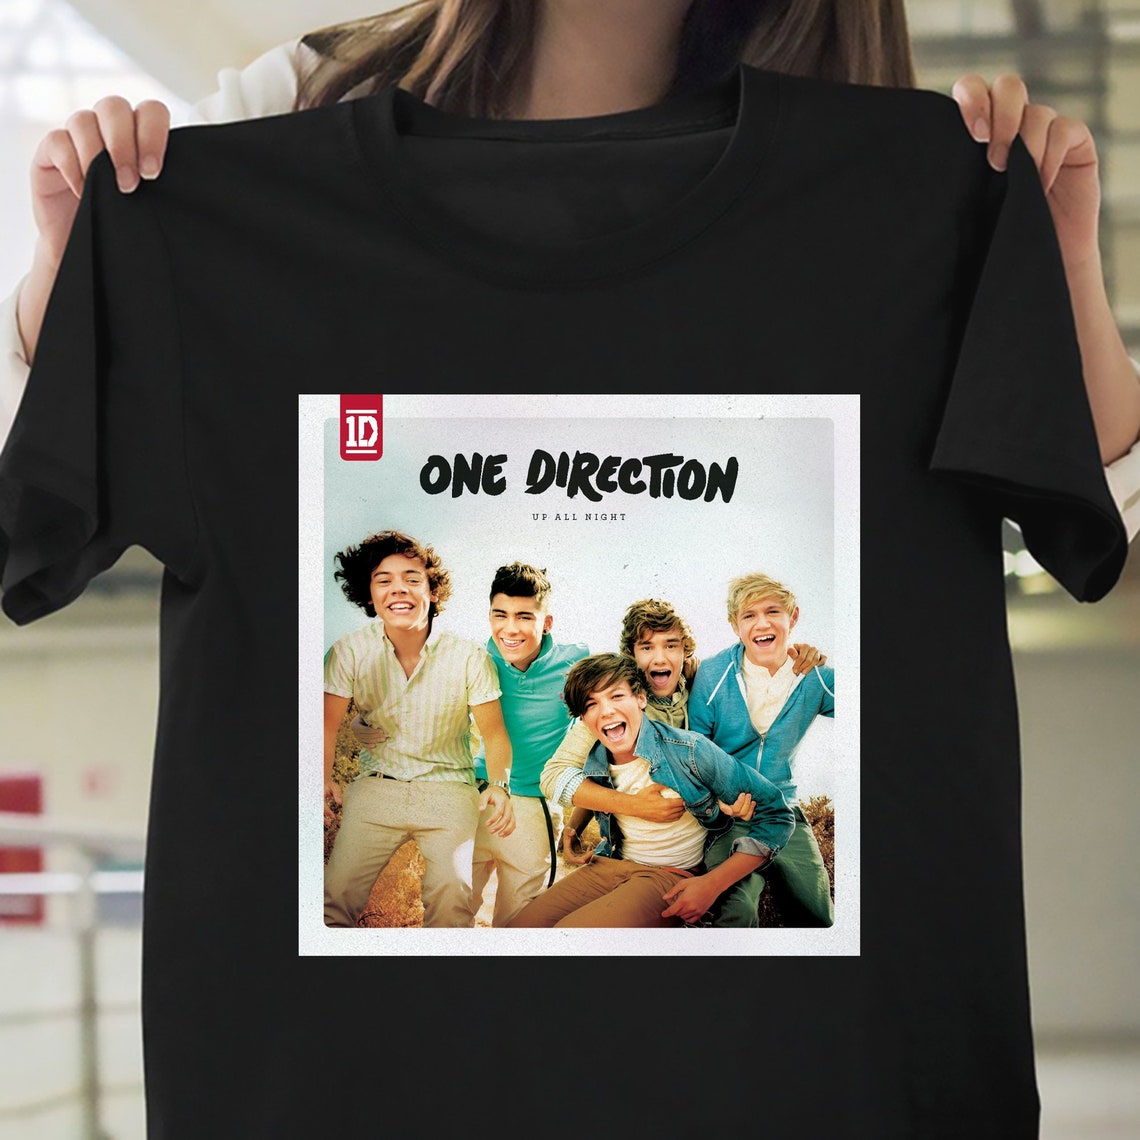 one direction up all night tour 2012 shirt